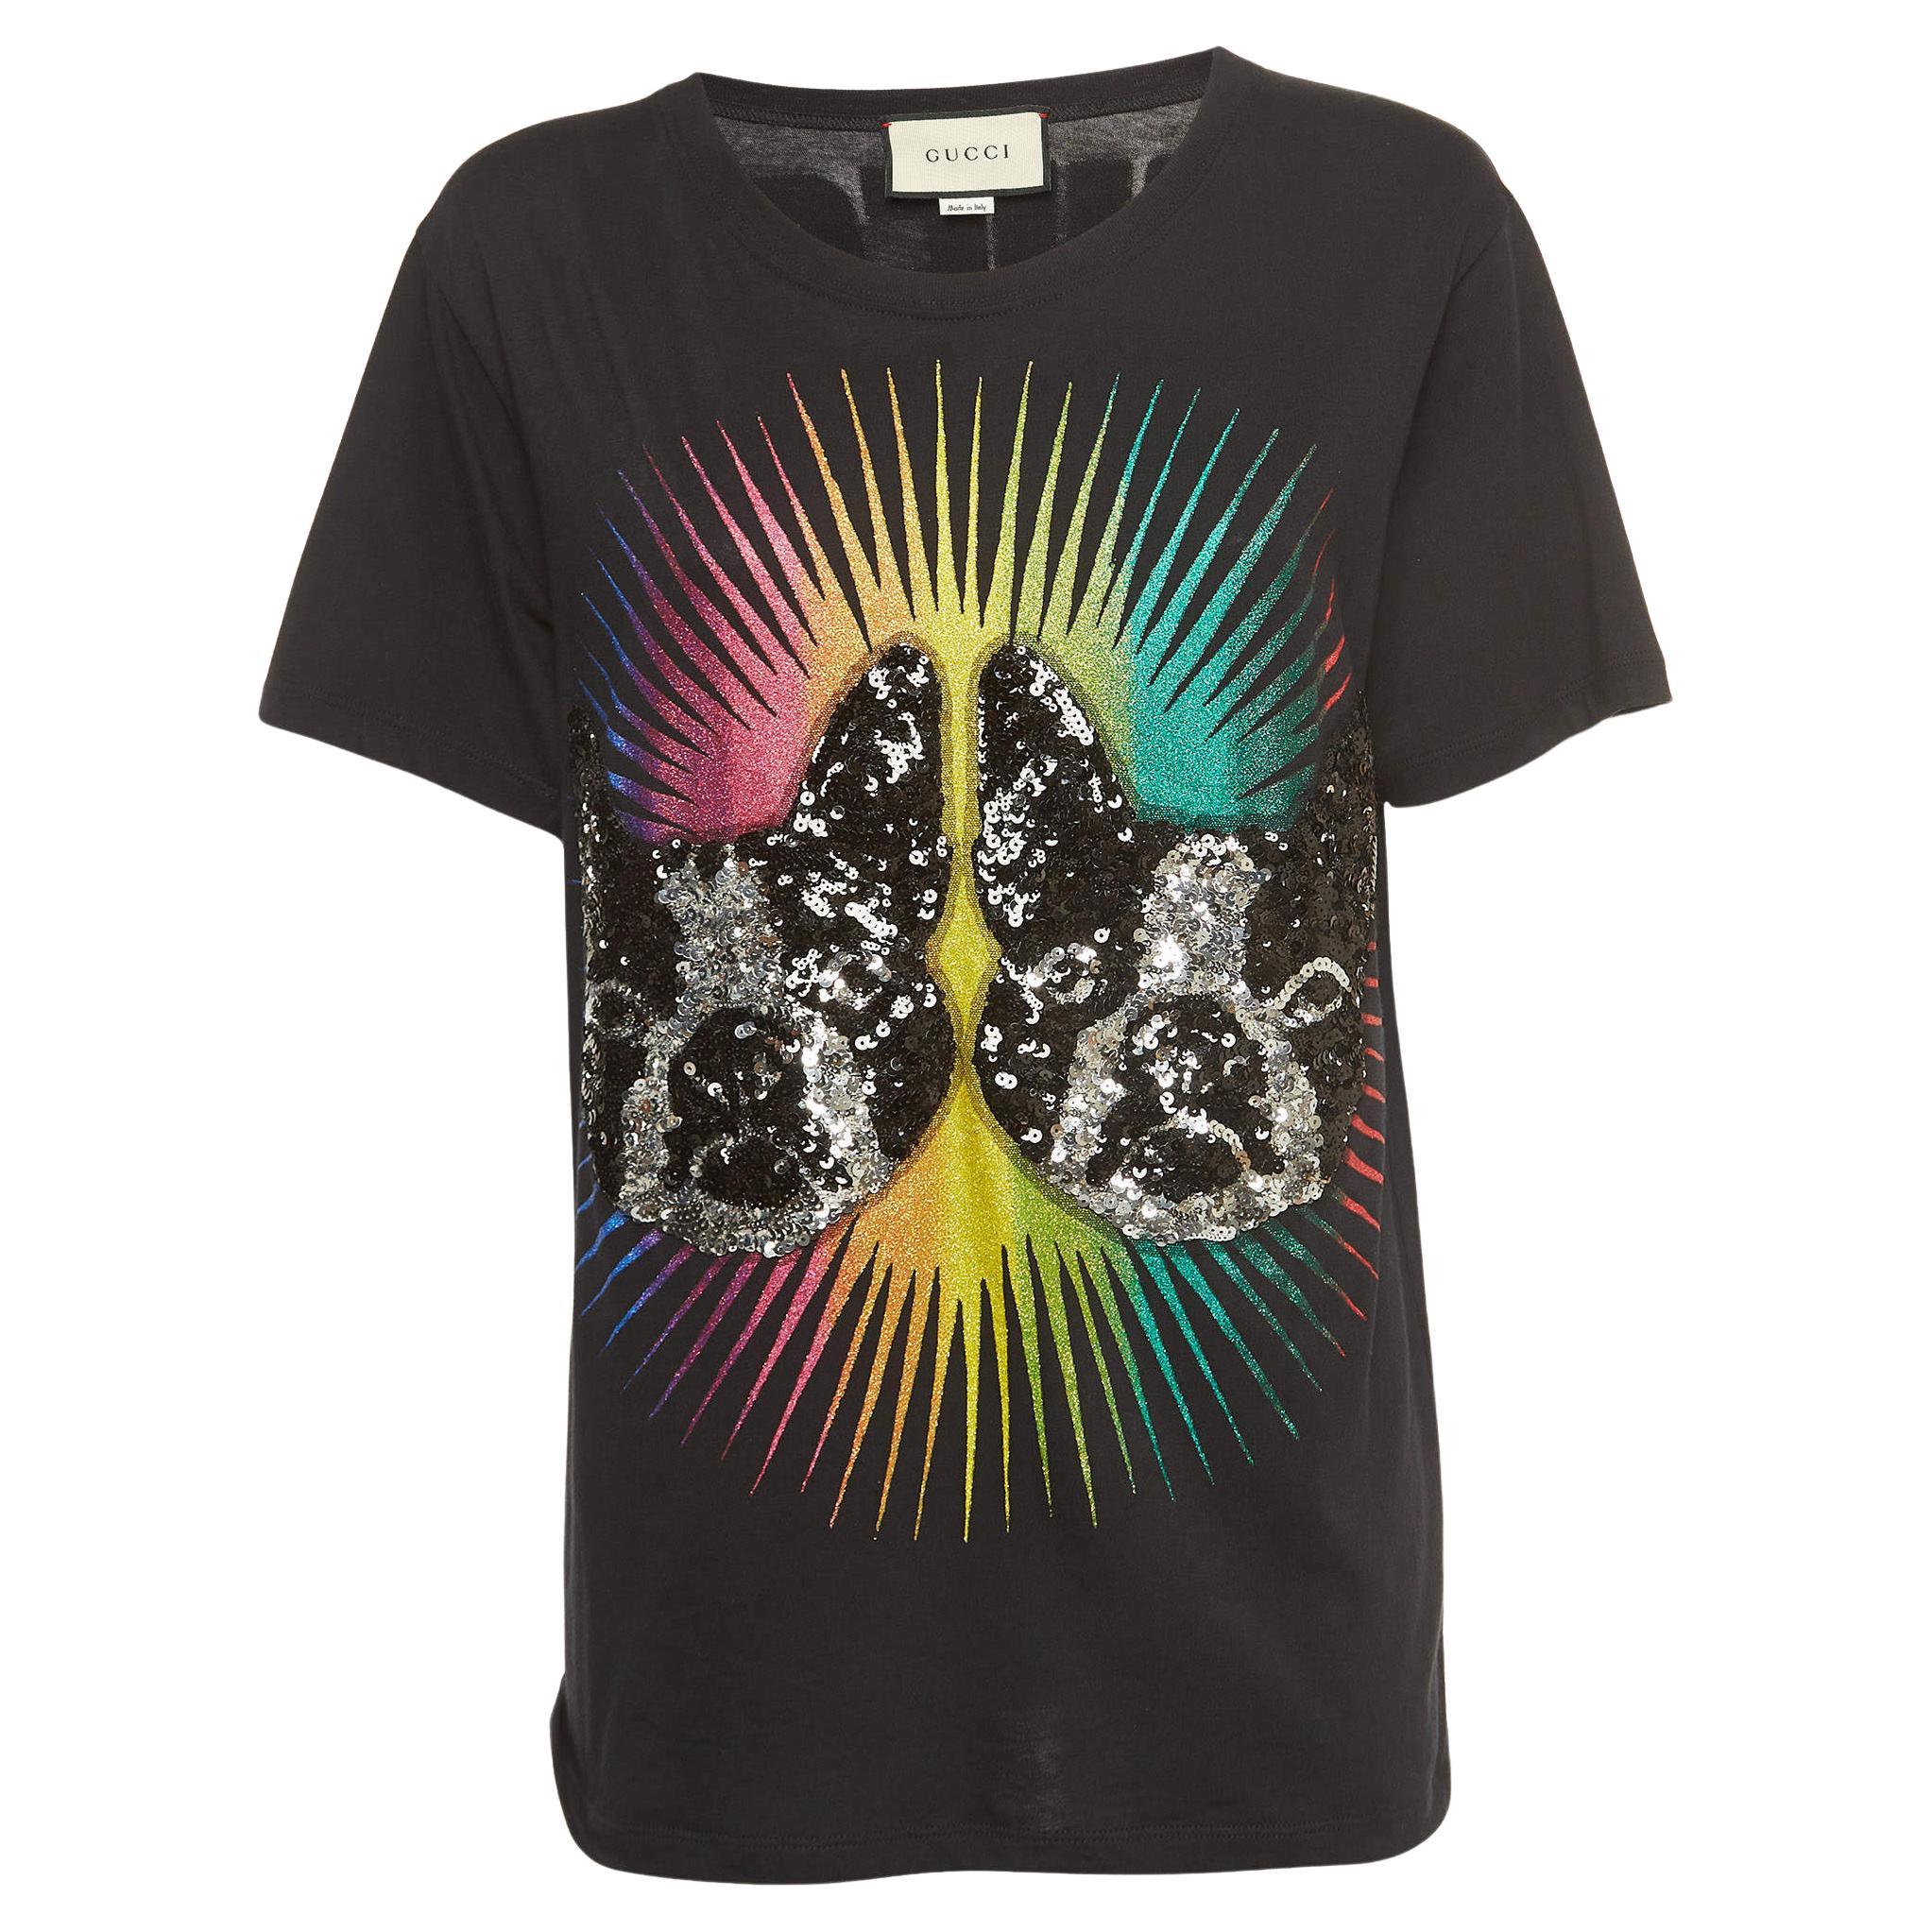 Gucci Black Cotton Sequined Dog Print T-Shirt XS For Sale